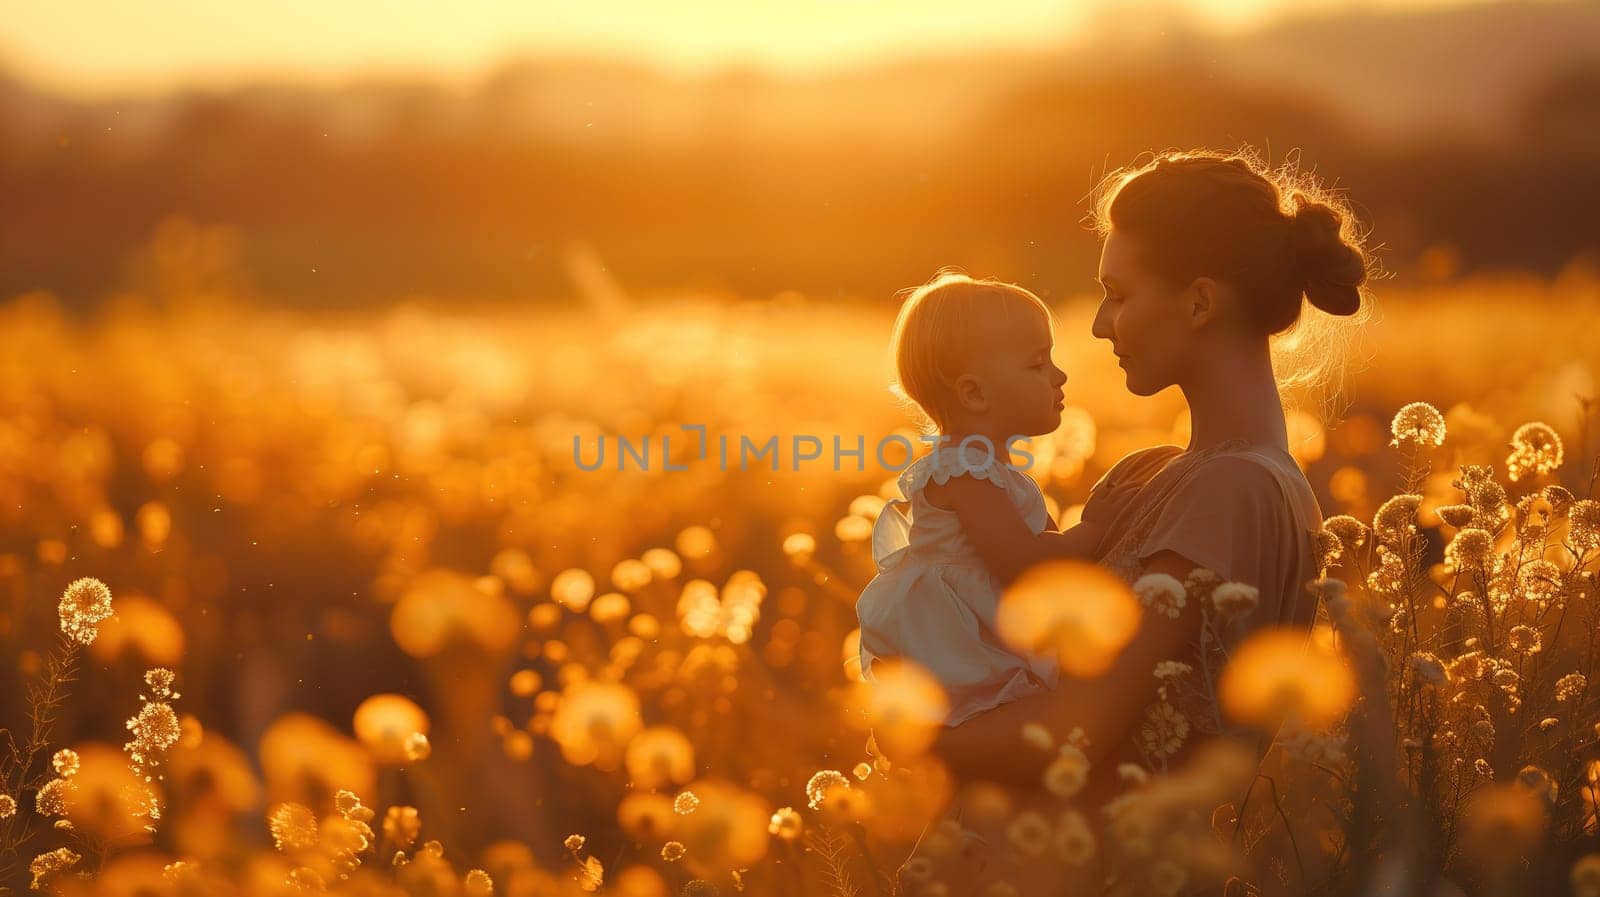 Woman and Child Standing in Dandelion Field by TRMK